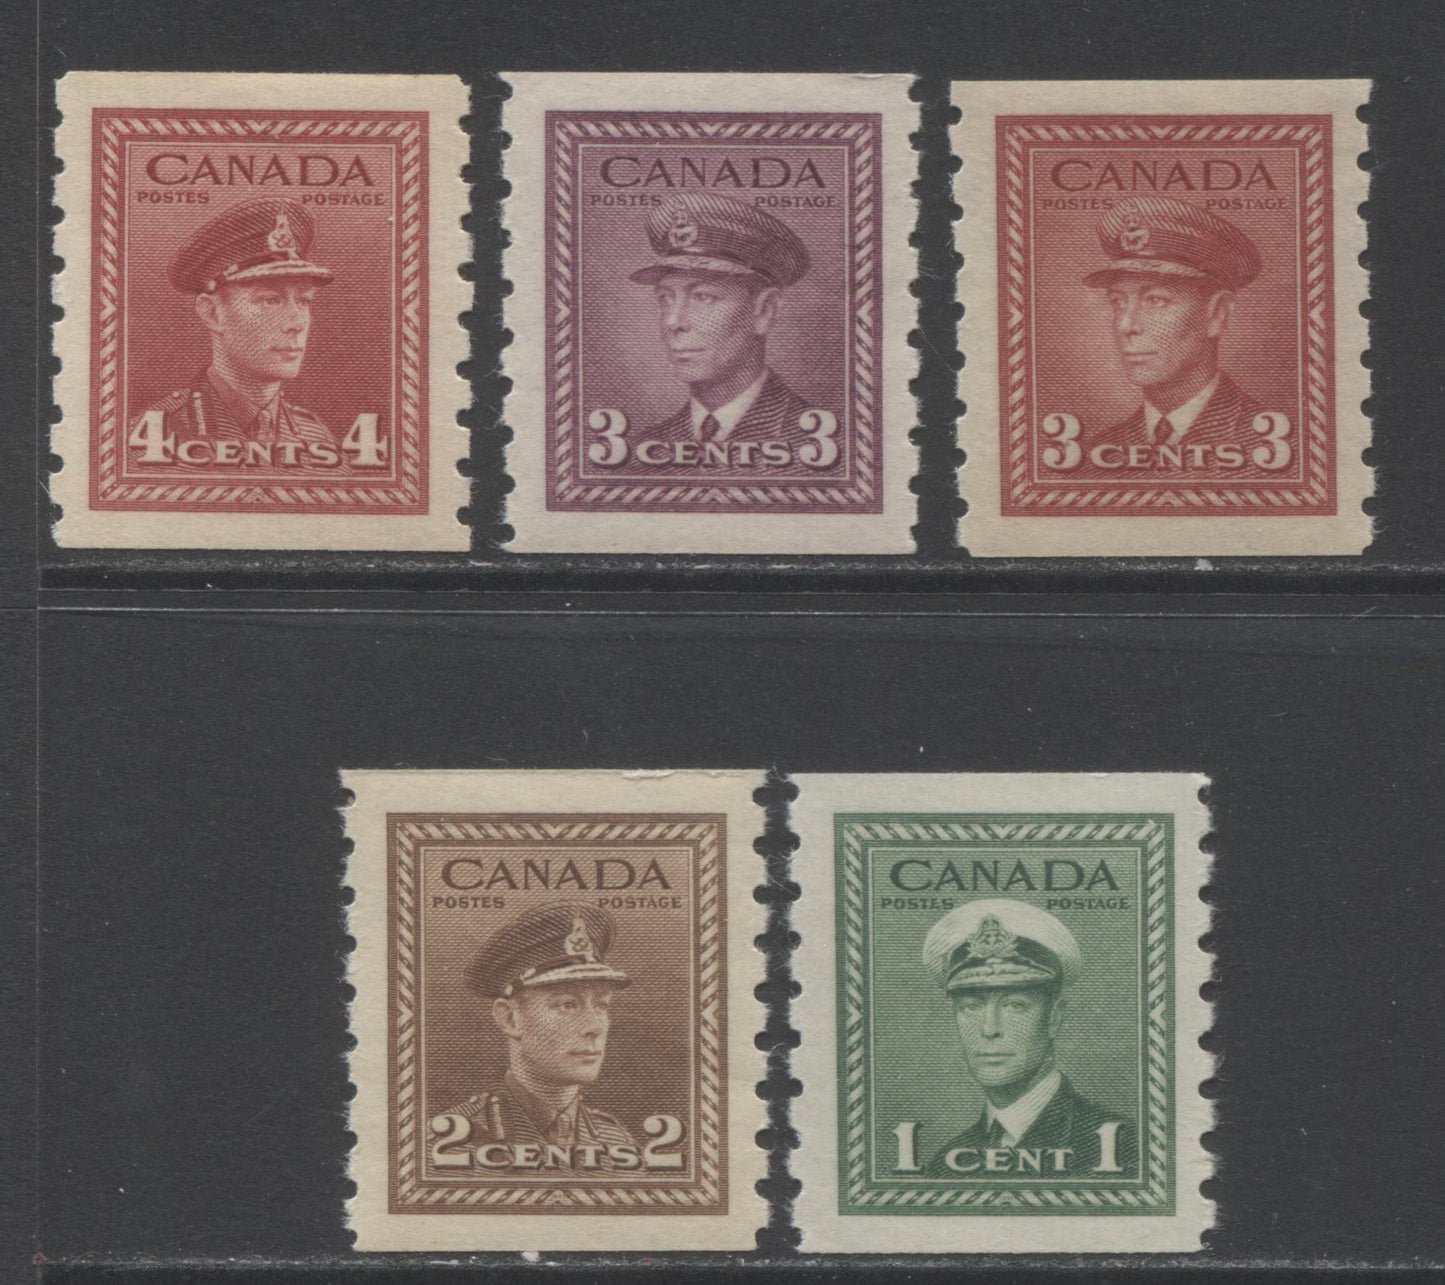 Lot 259 Canada #263-267 1c - 4c Green King George VI, 1942-1943 War Issue Coils, 5 VFNH Singles With Different Papers & Gums, Perf 8 Vertical